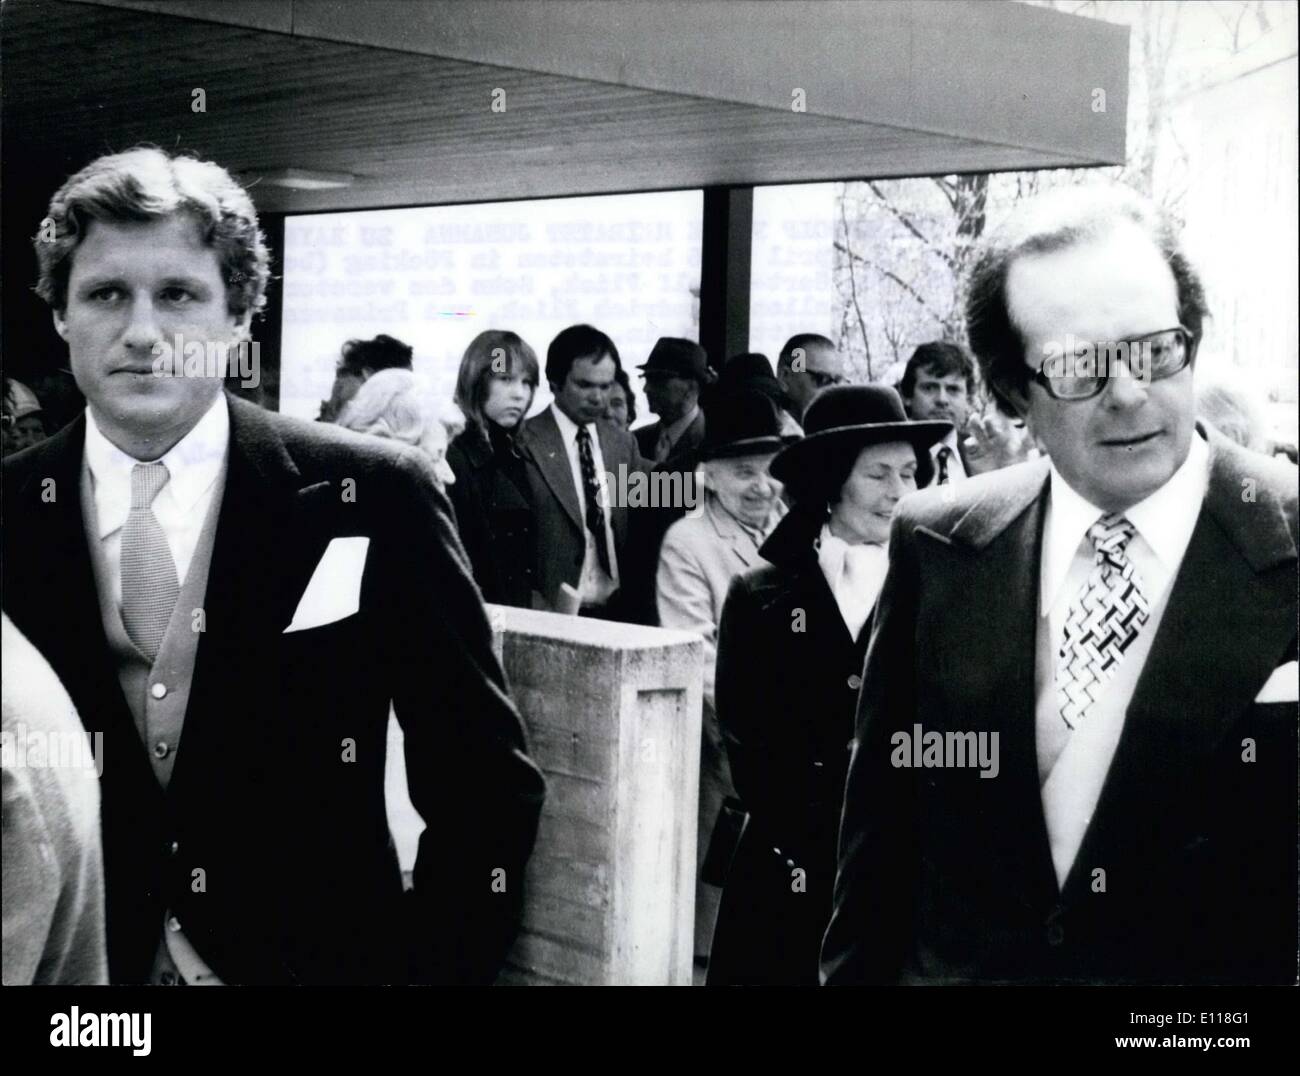 Apr. 15, 1976 - Dr. Jur Gert Rudolf Flick, son of deceased industrialist Friedrich Flick, married Princess Johanna von Sayn-Wittgenstein. Pictured are the brother of the bridegroom, Dr. Christian Friedrich(left) and their uncle Friedrich Karl Flick(right) in front of the church. Stock Photo